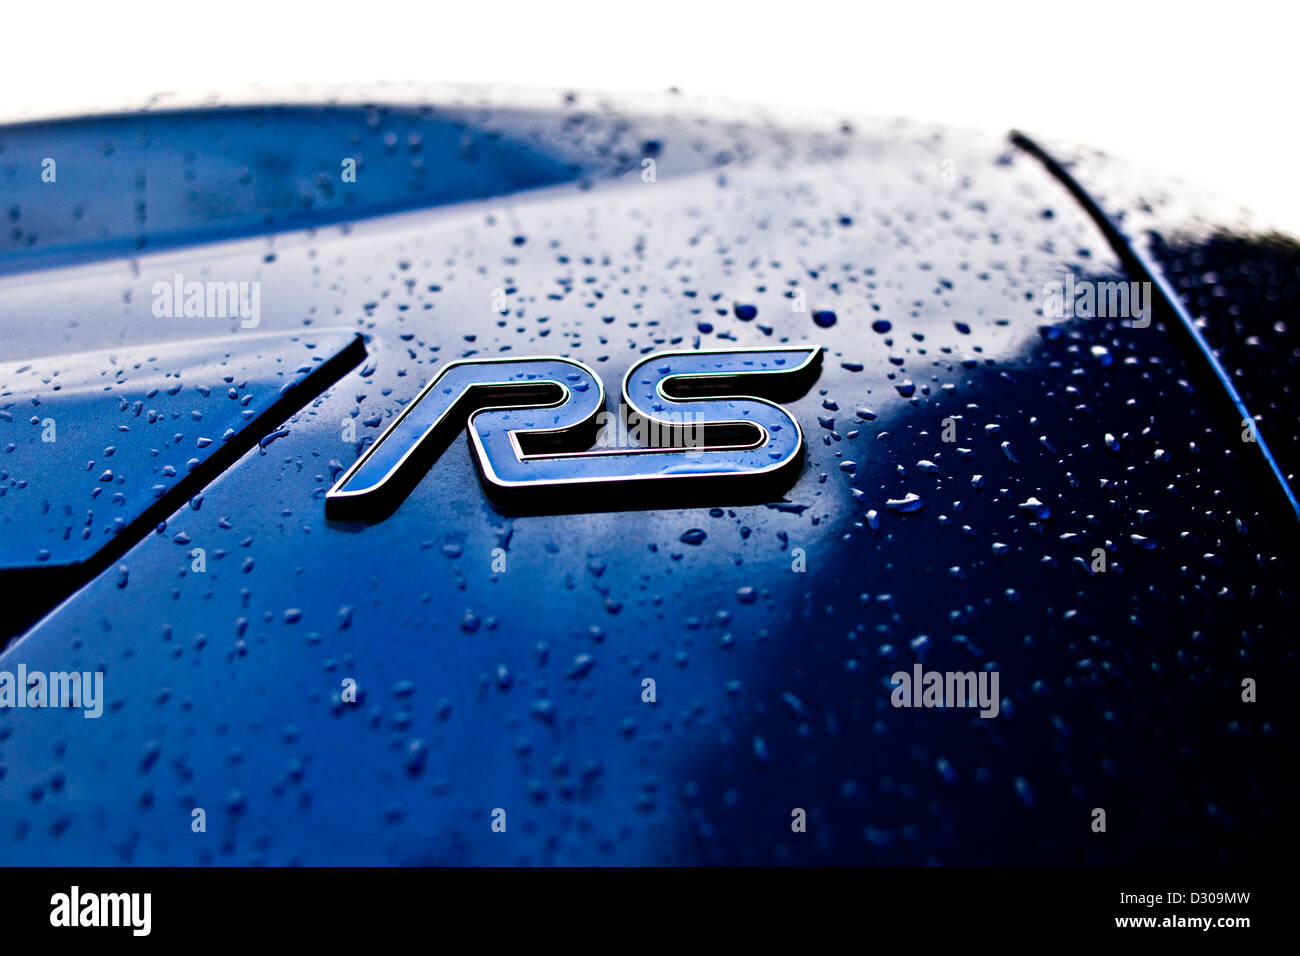 Ford RS Insignien, Winchester, UK, 27 11 09 blau Stockfoto